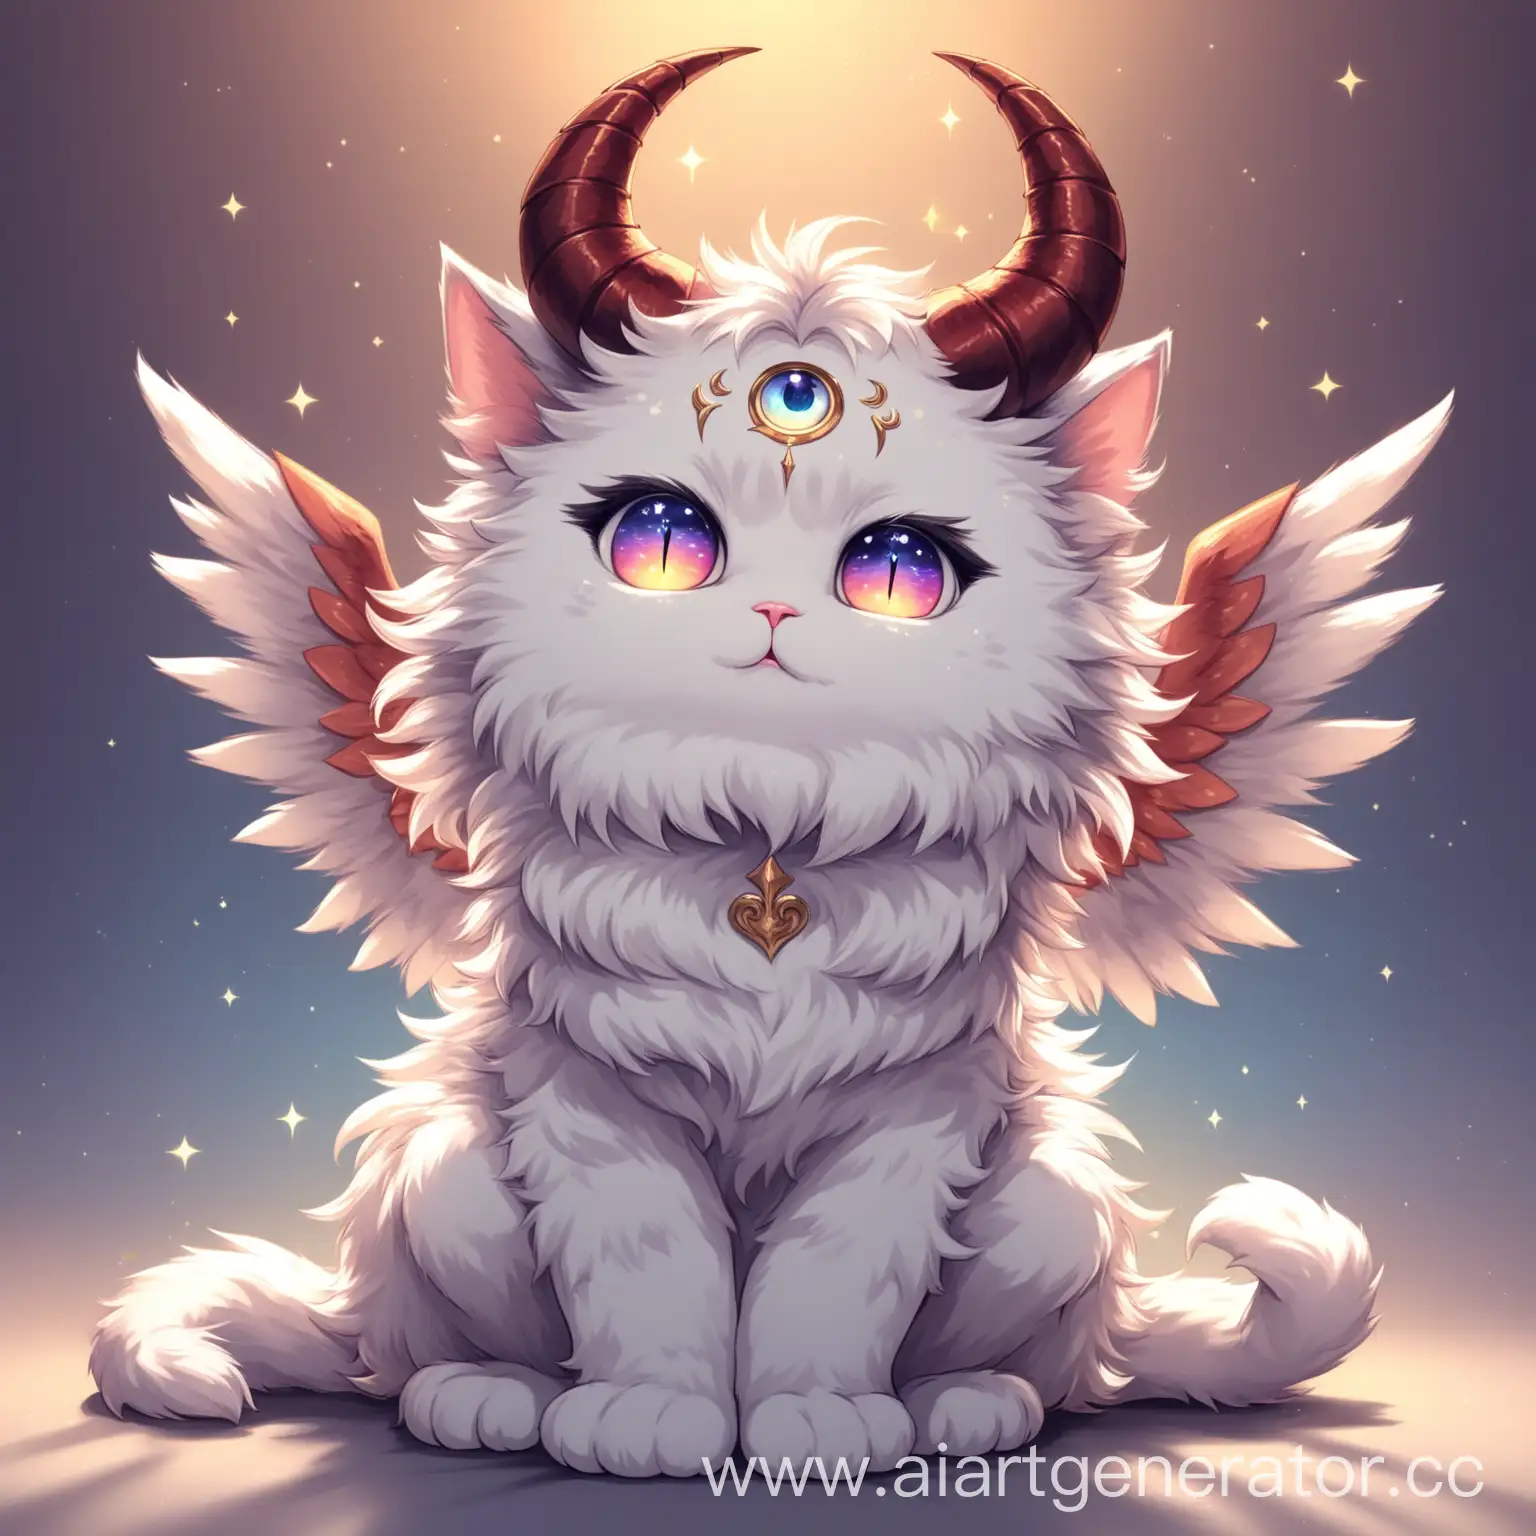 Fantasy-Furry-Cat-with-Three-Eyes-Wings-and-Horns-Adorable-Fluffy-Creature-Art